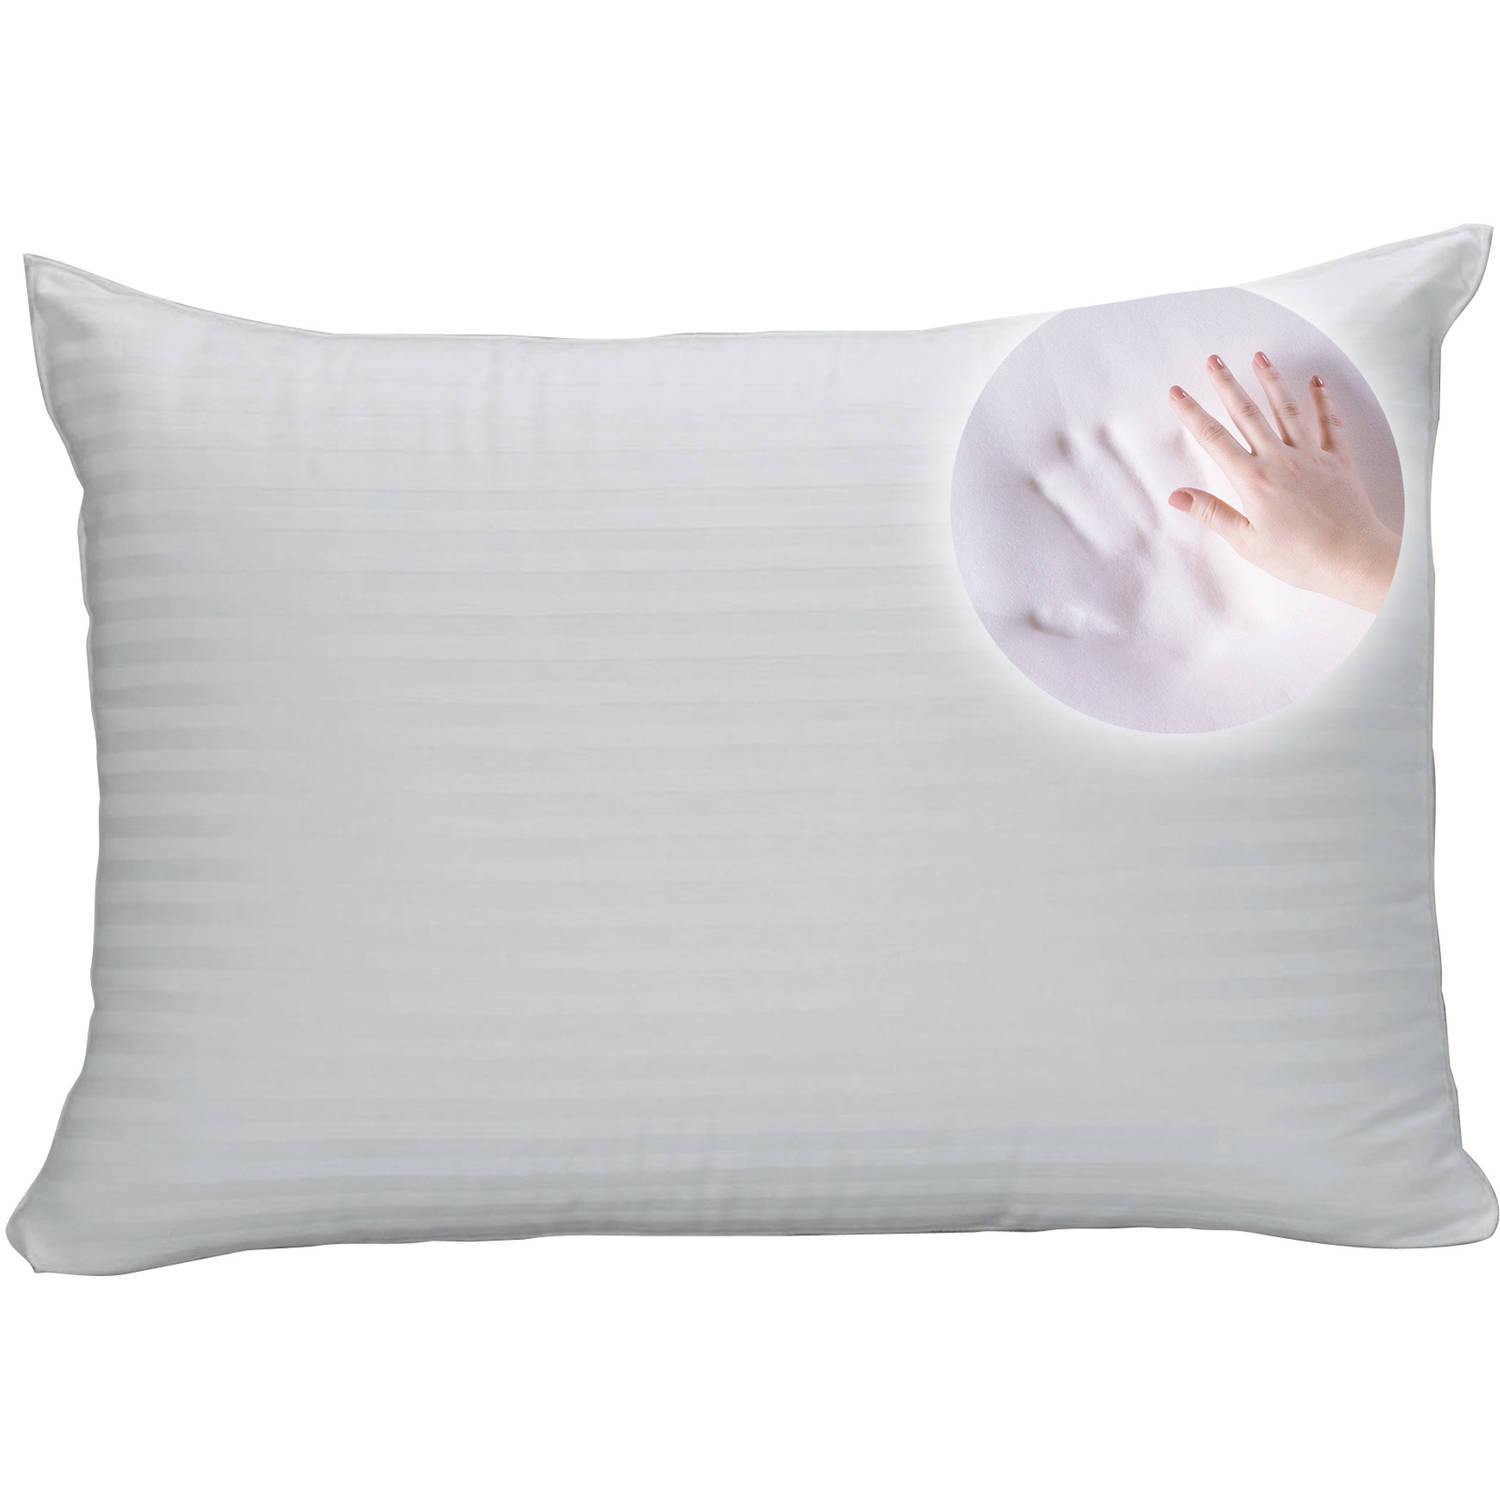 Beautyrest Classic Foam Pillow with Removable Cover, Multiple Sizes - image 1 of 4